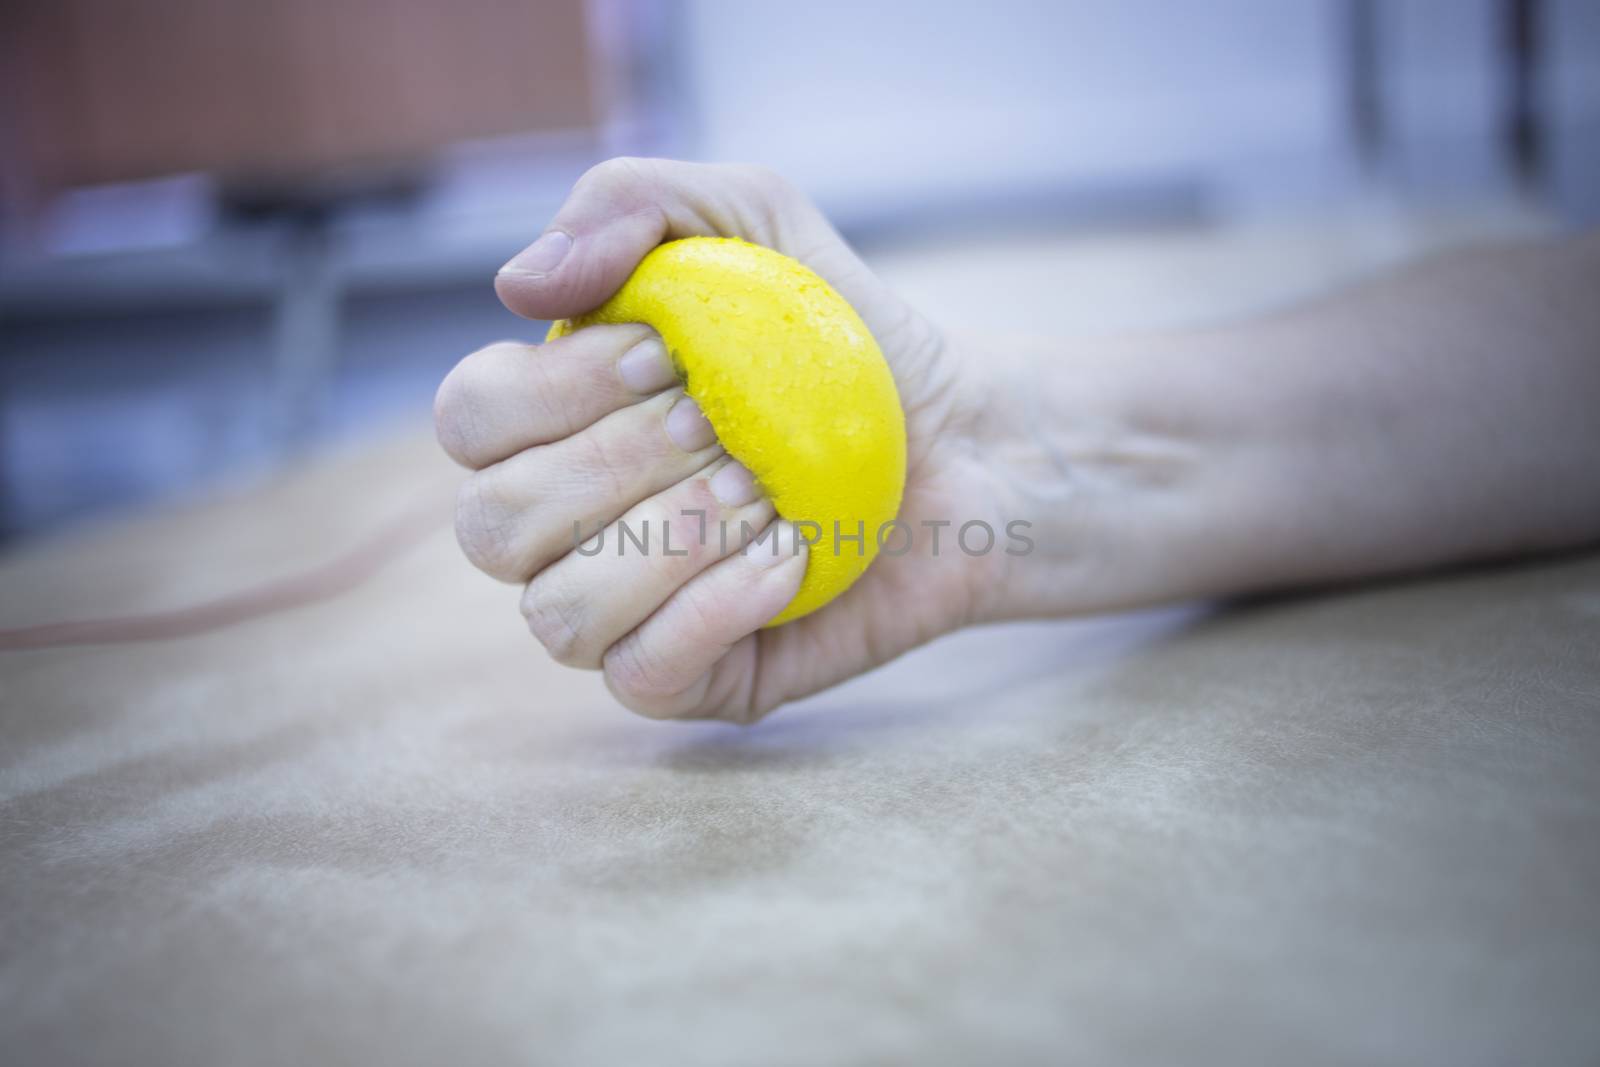 Female patient with physical injury and Rheumatoid arthritis squeezing physiotherapy ball with hand in hospital clinic resting on bed.